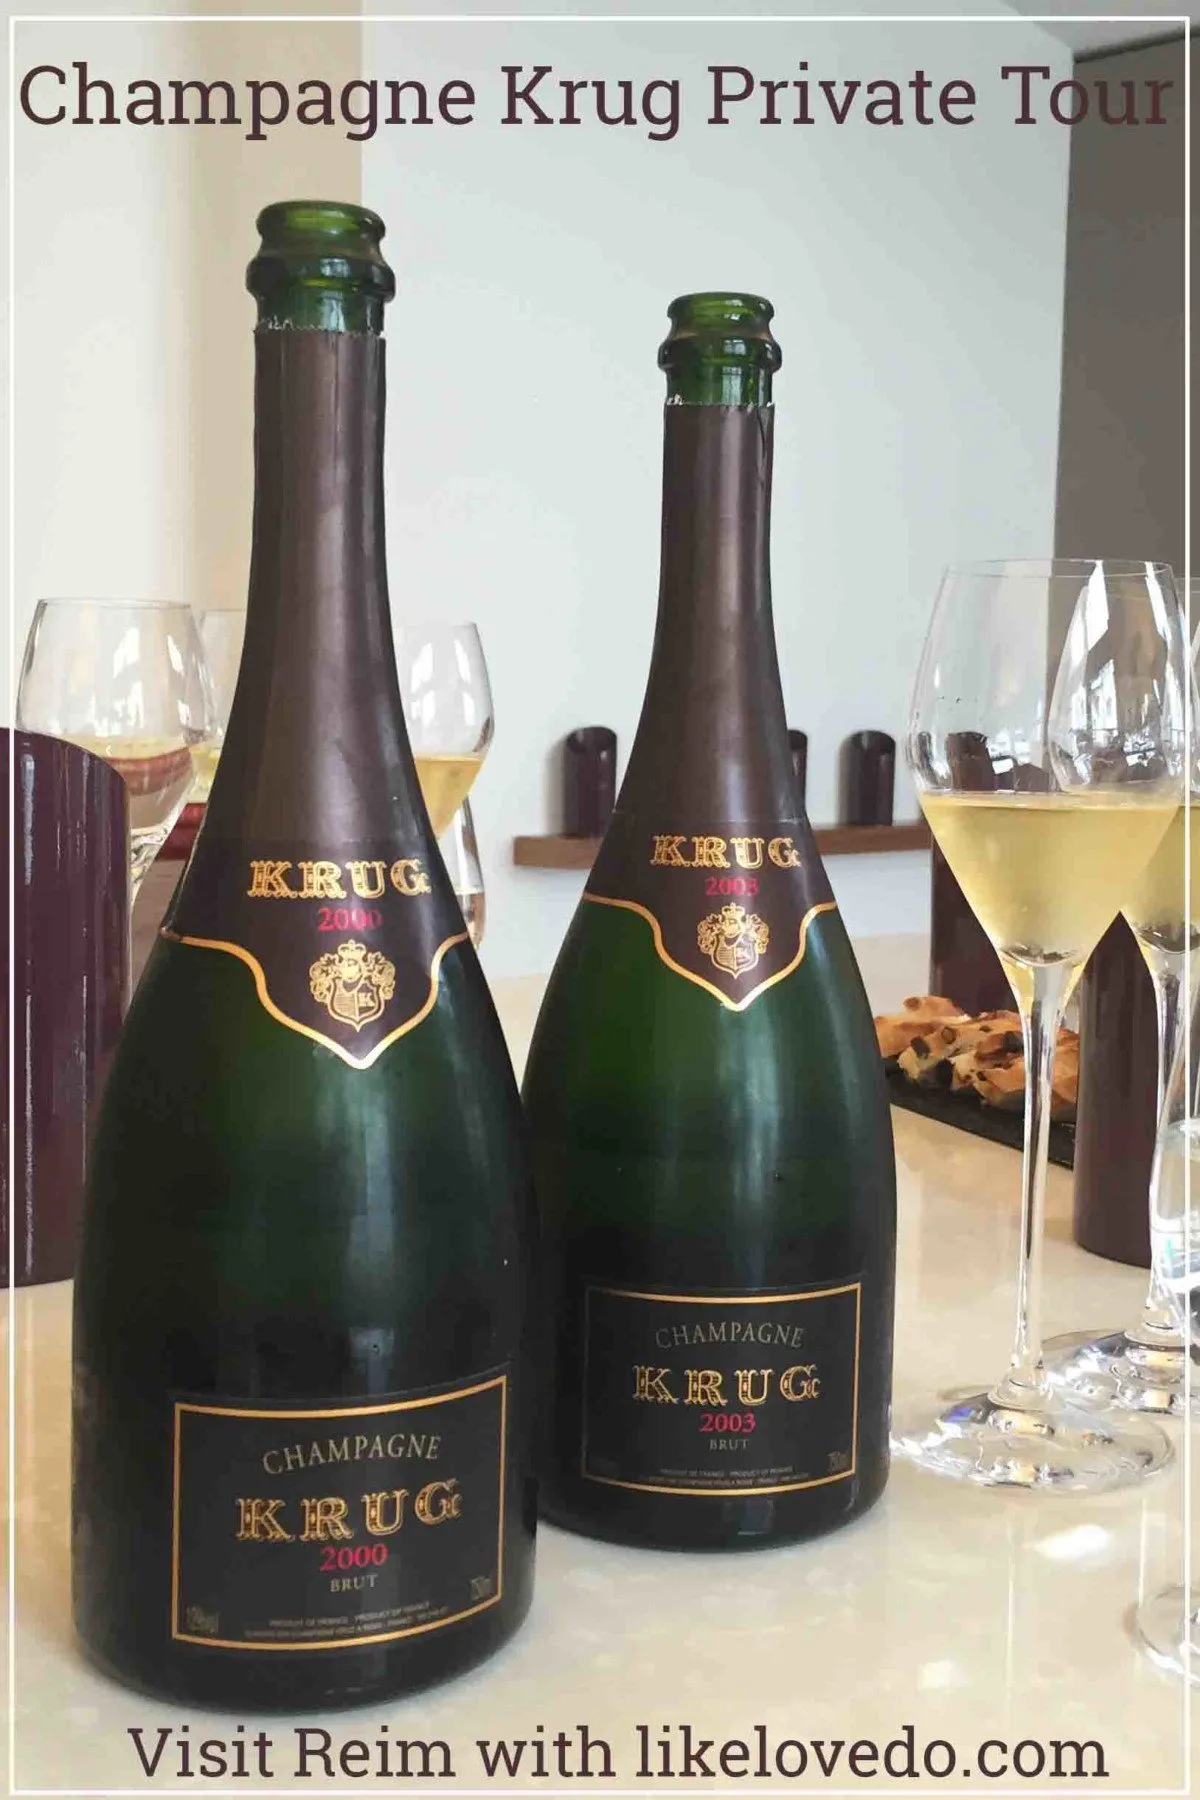 Krug is one of the most prestigious houses in the champagne region in France. To be able to visit  and do a private tour and tasting at The House of Krug is truly exceptinonal. Joseph Krug established the House of Krug in 1843 to create the very best champagne.  Take a unique tour and taste this fabulous Champagne